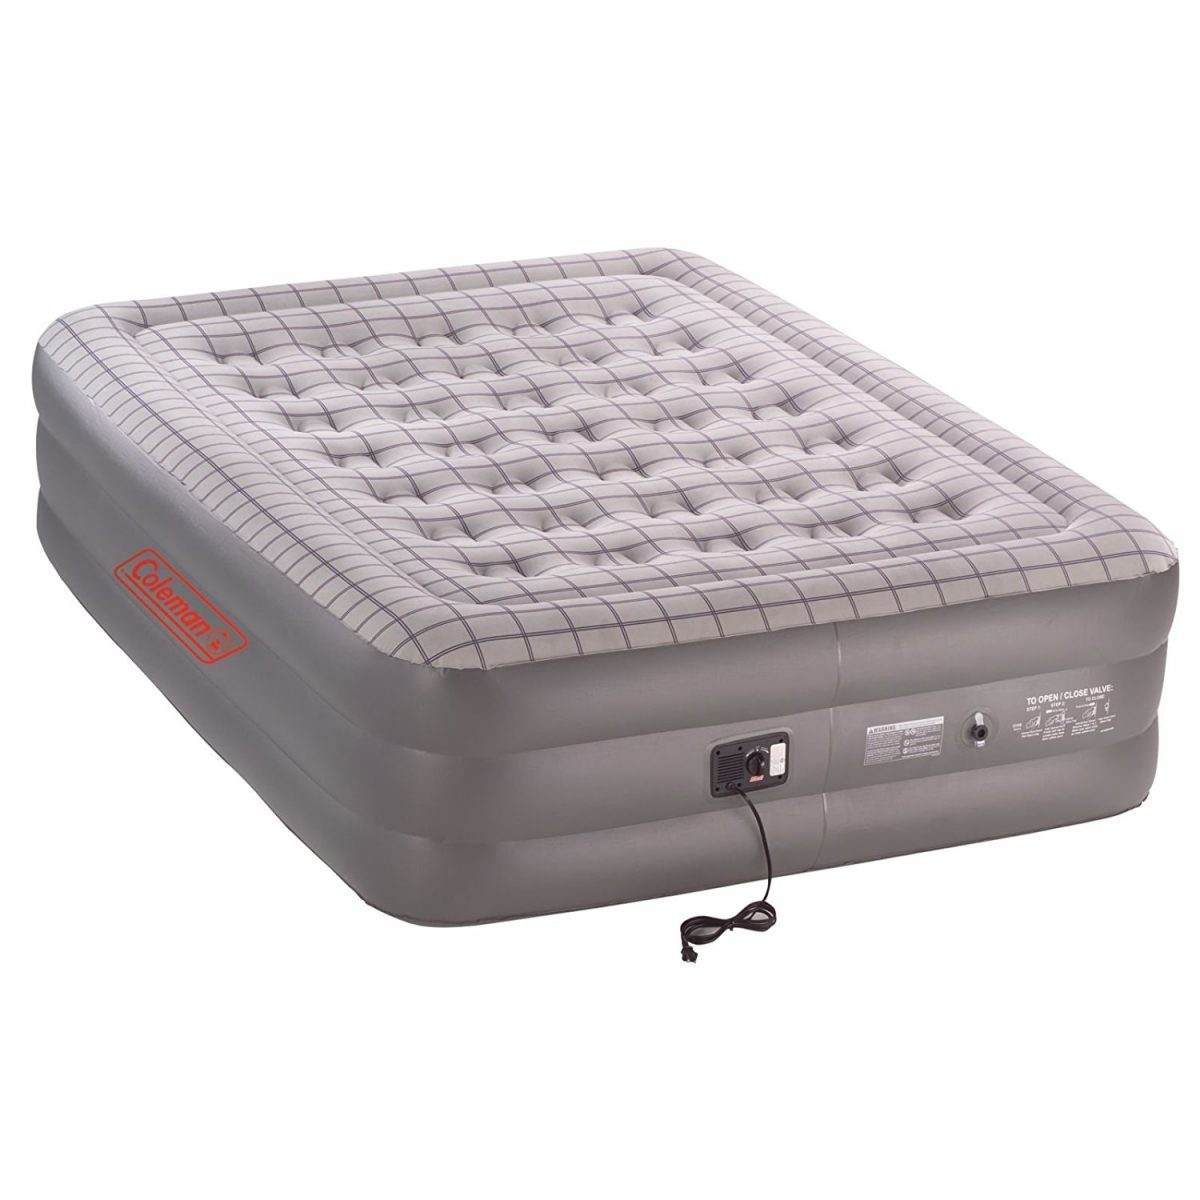 Coleman Premium Double High Support Rest Airbed